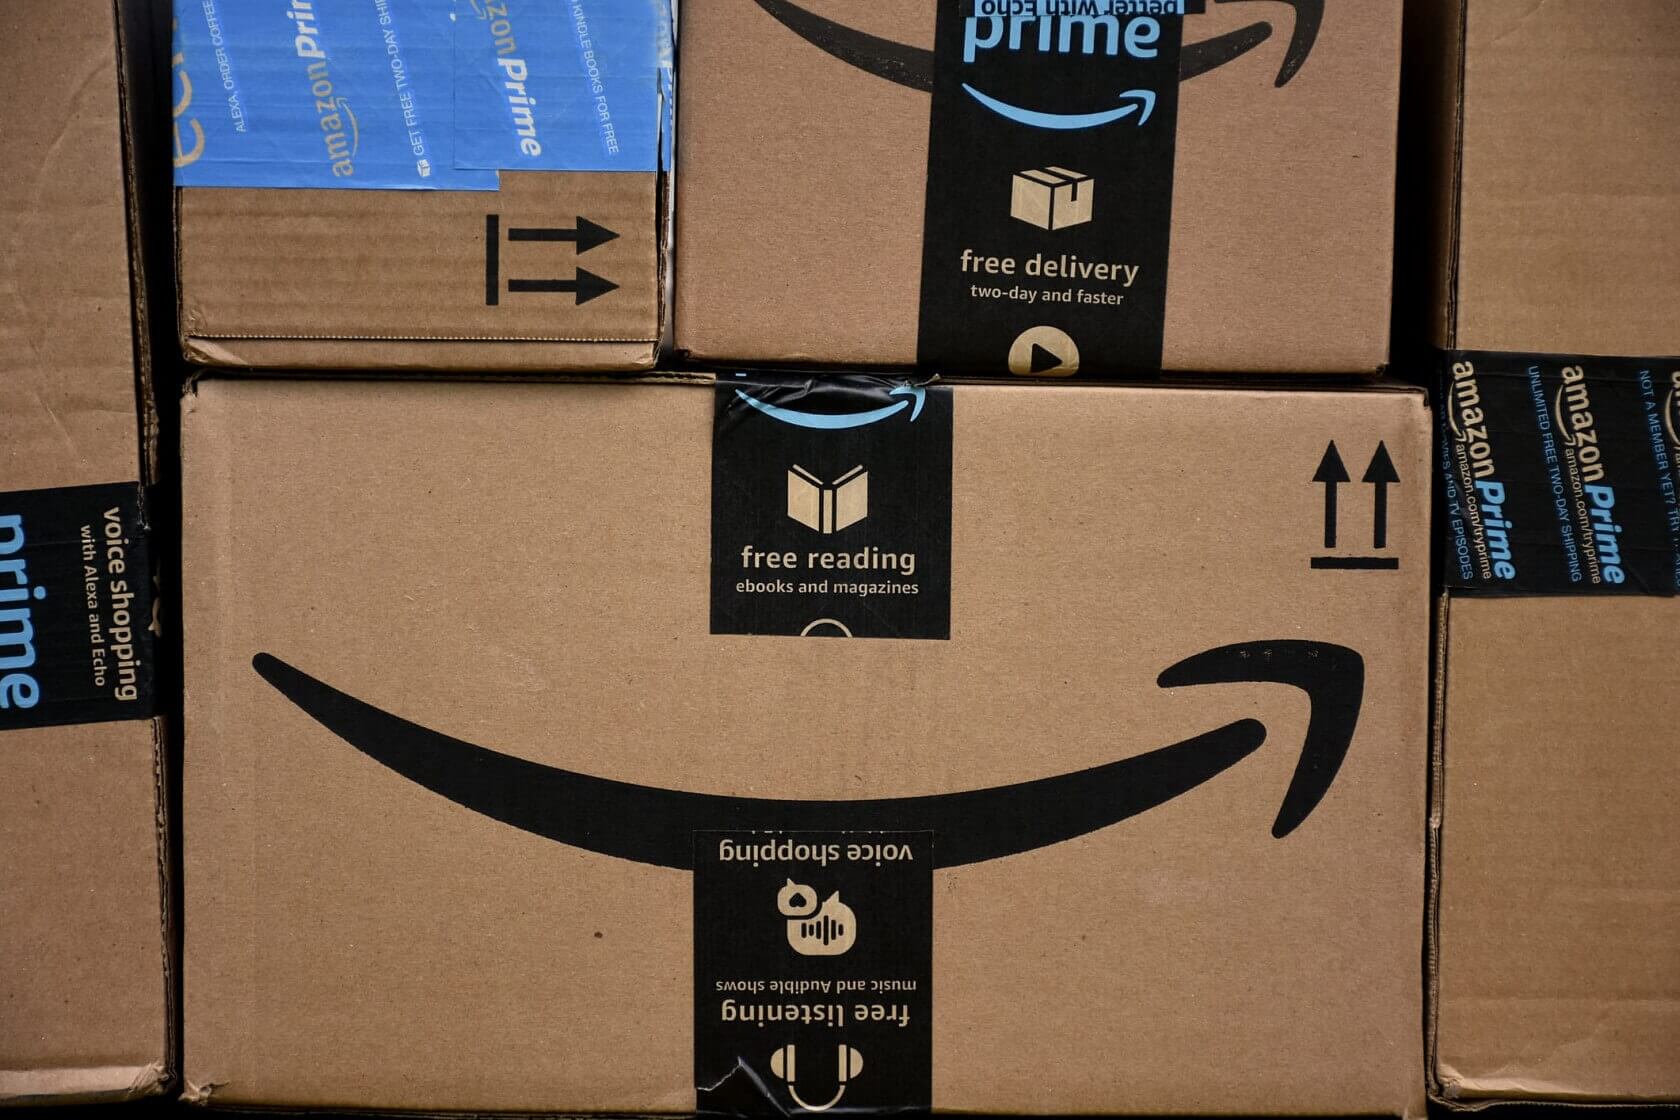 Amazon reportedly asks customers to cooperate with DOJ price gouging probe